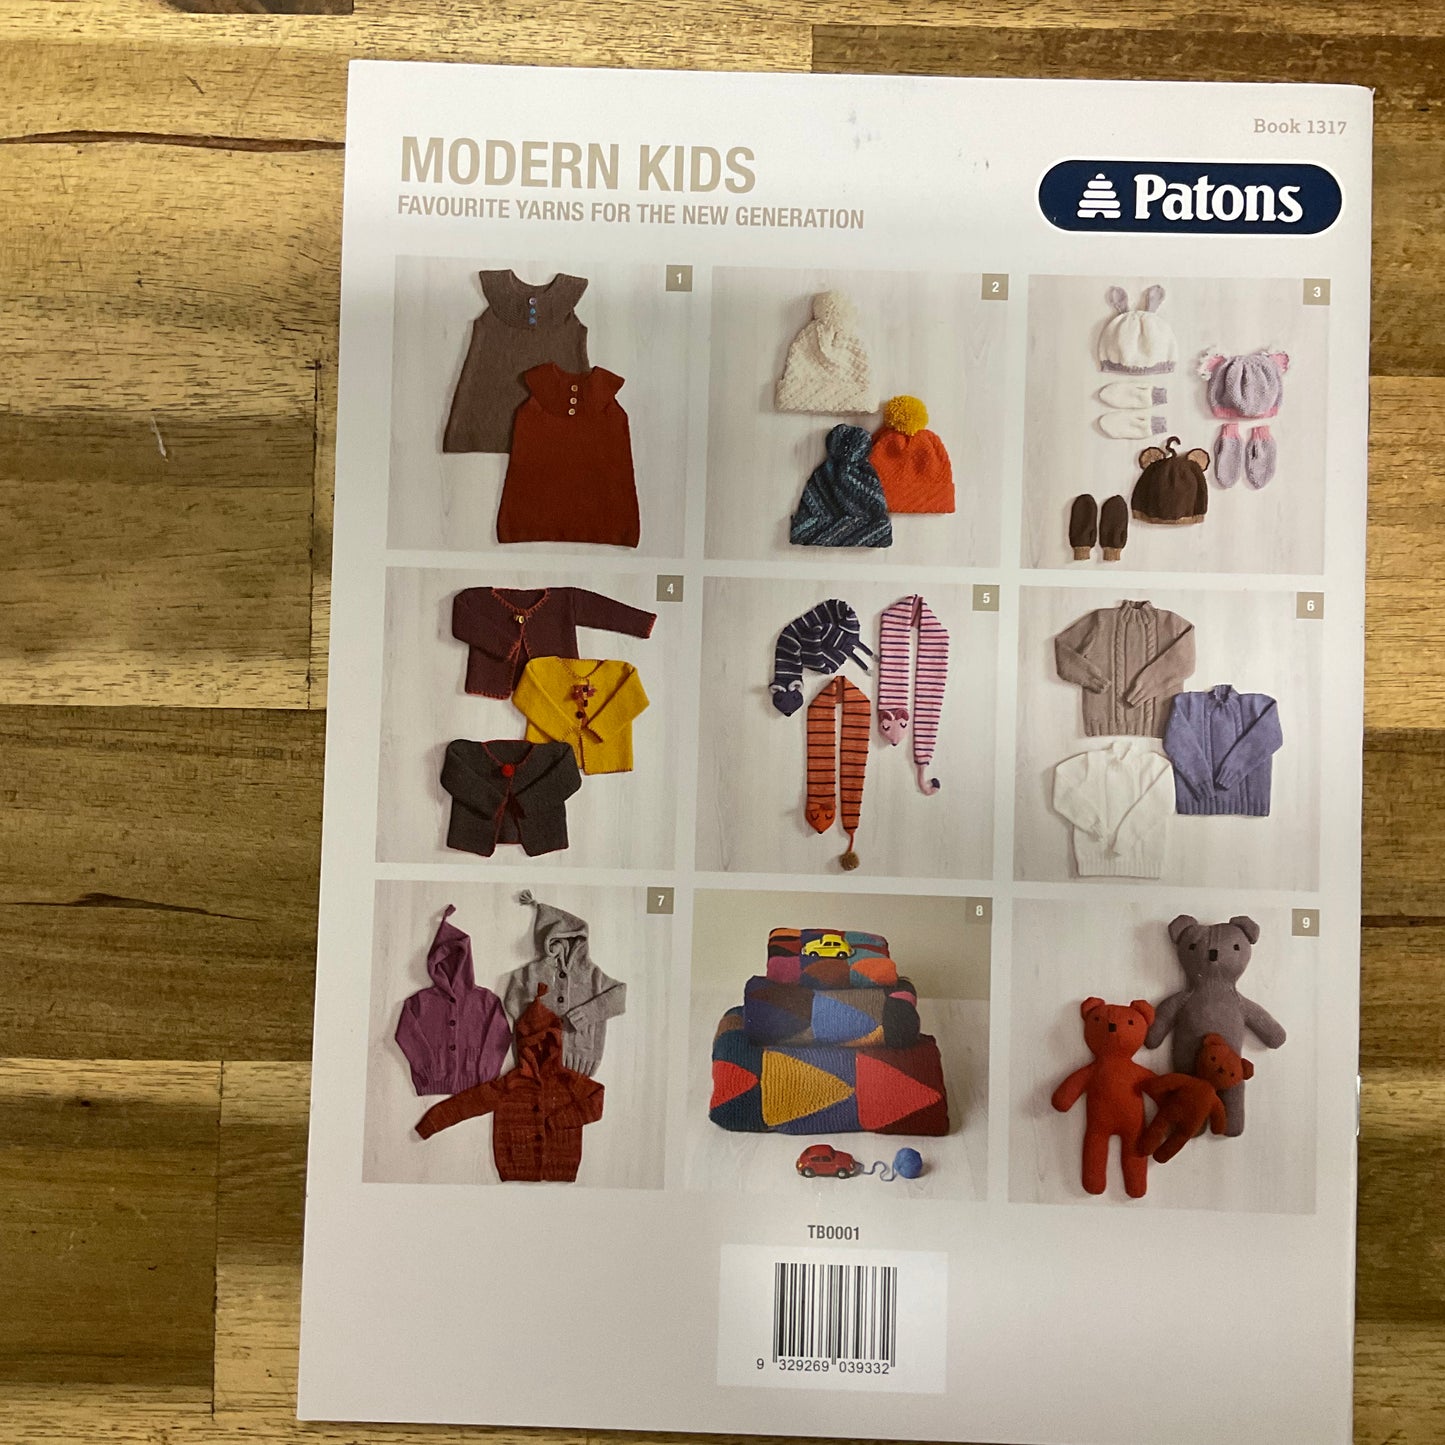 Hand Knits For Modern Kids